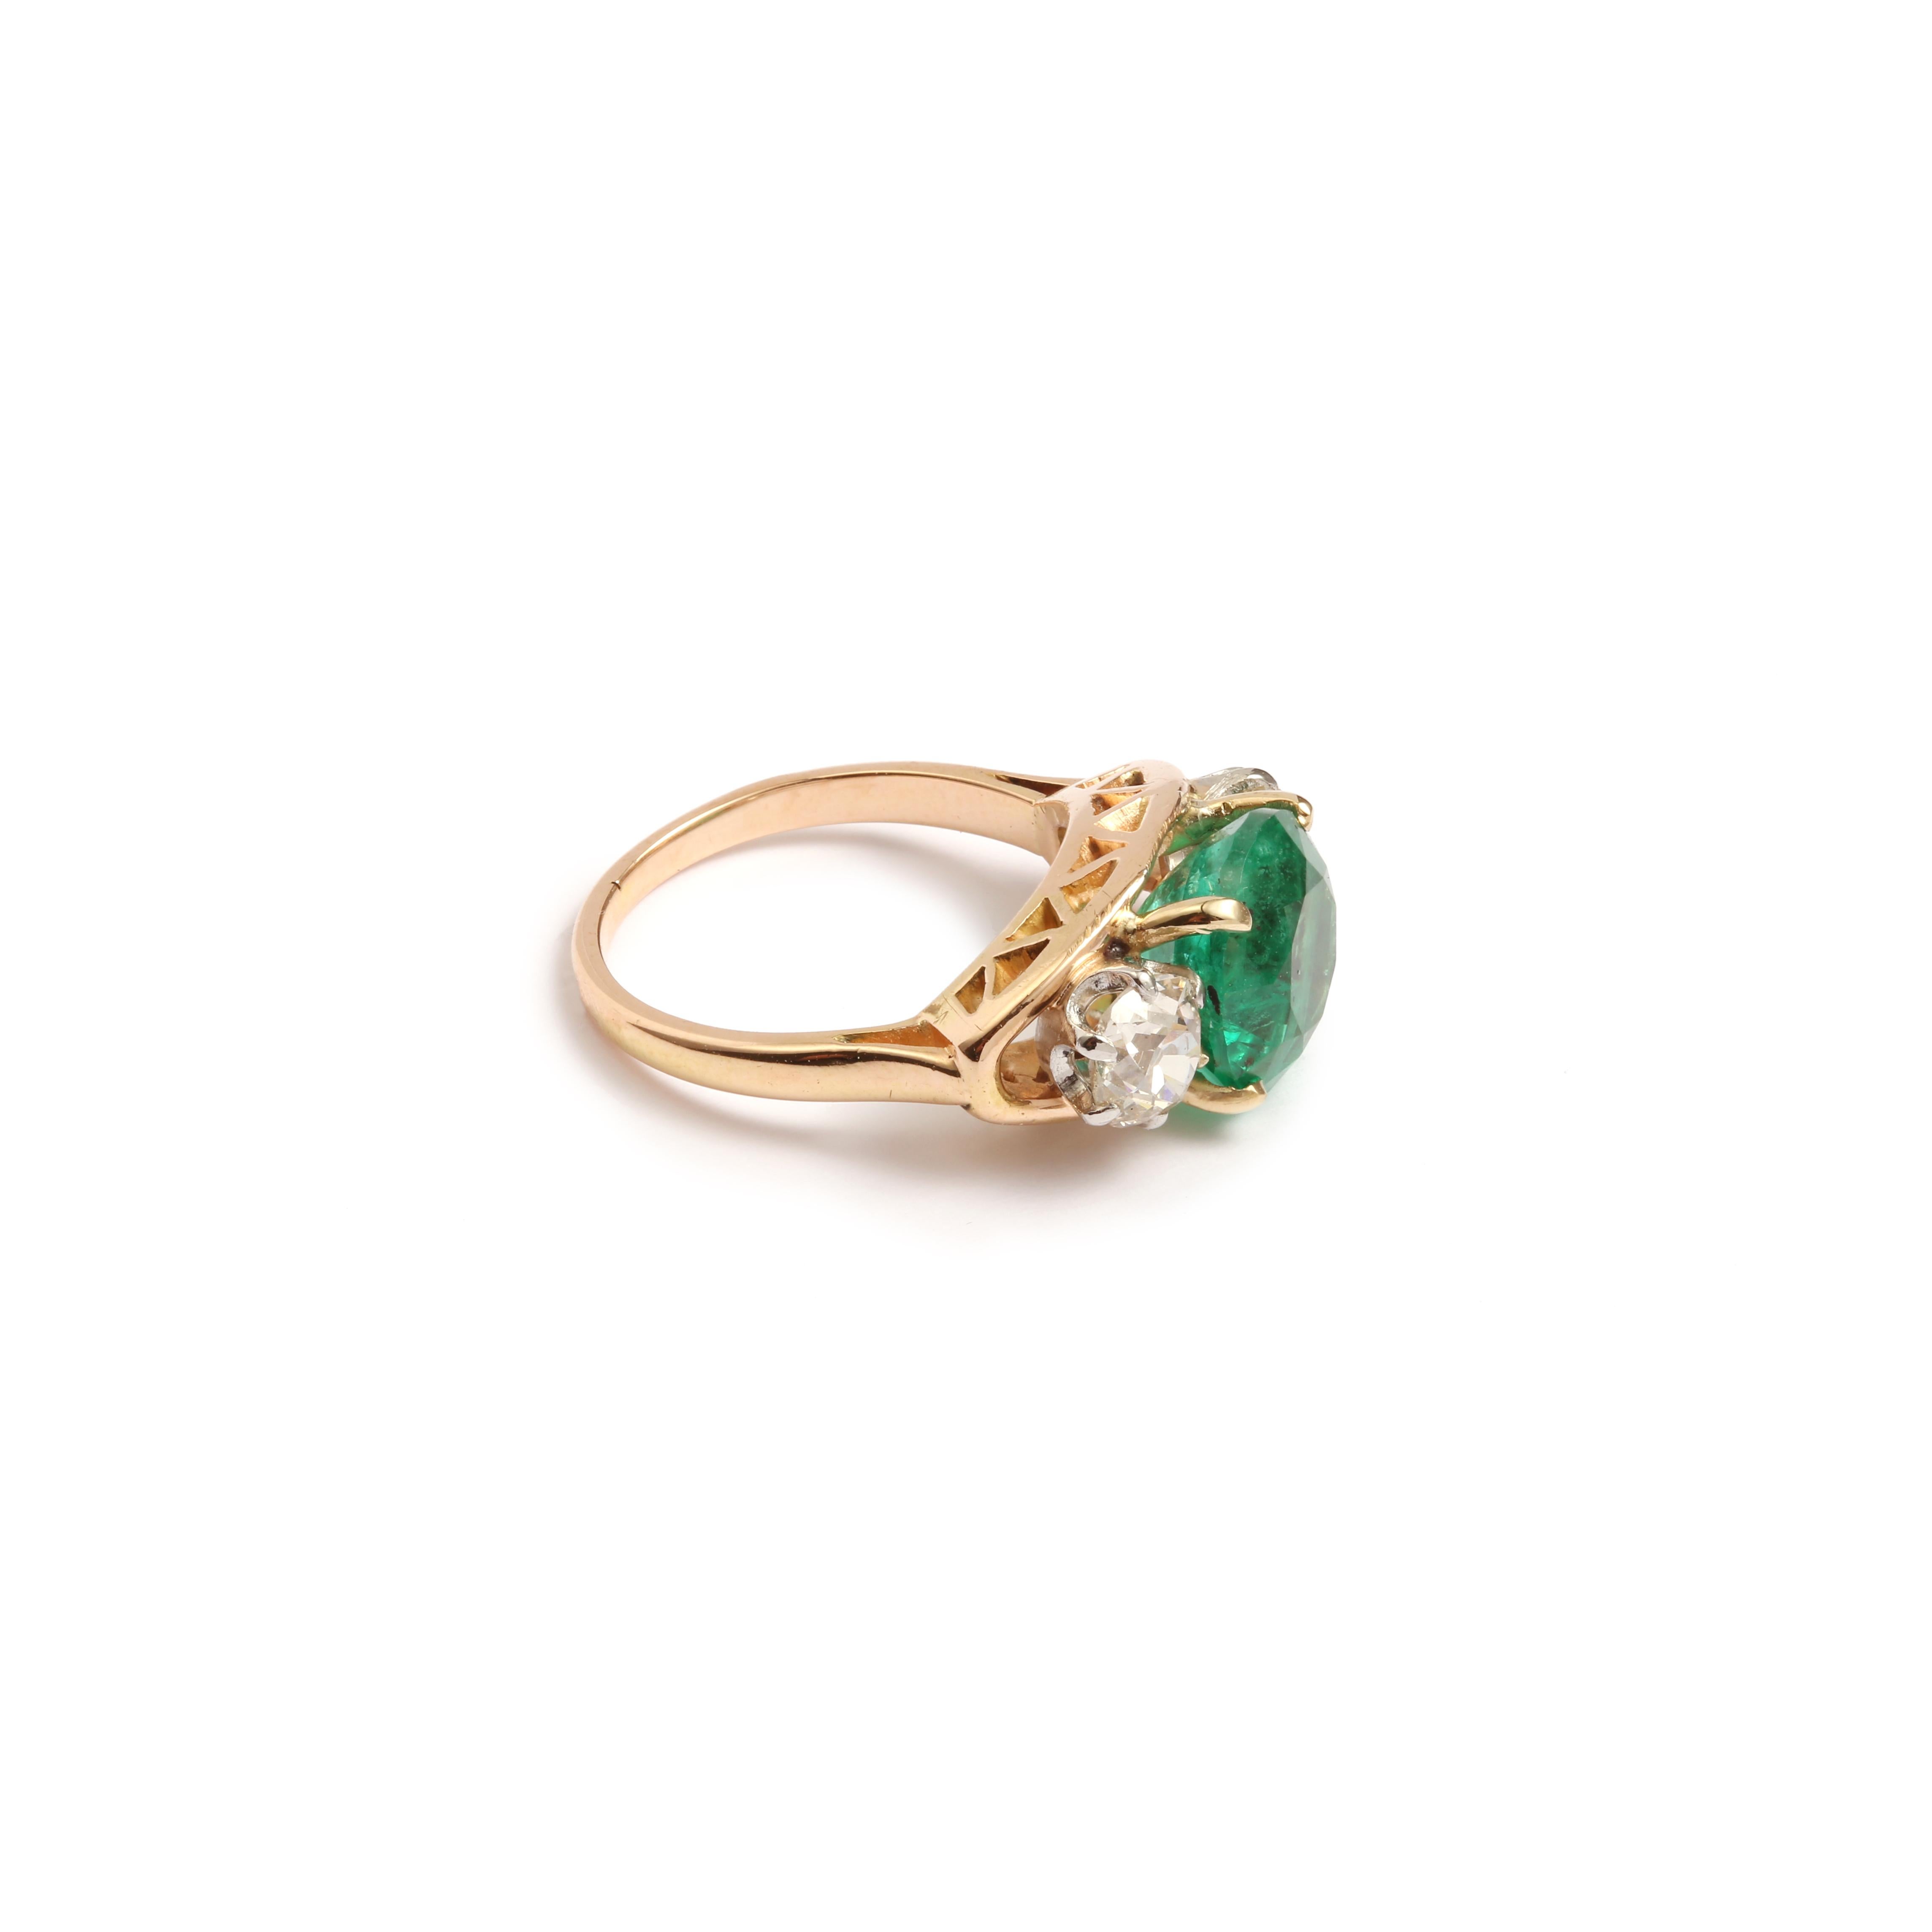 Ring set with a round cut Ethiopian emerald surrounded by two cushion cut diamonds.

Weight of the emerald : 4.35 carats

With Gem Paris certificate, specifying Natural Emerald, moderate oil impregnation, origin Ethiopia.

Total estimated weight of